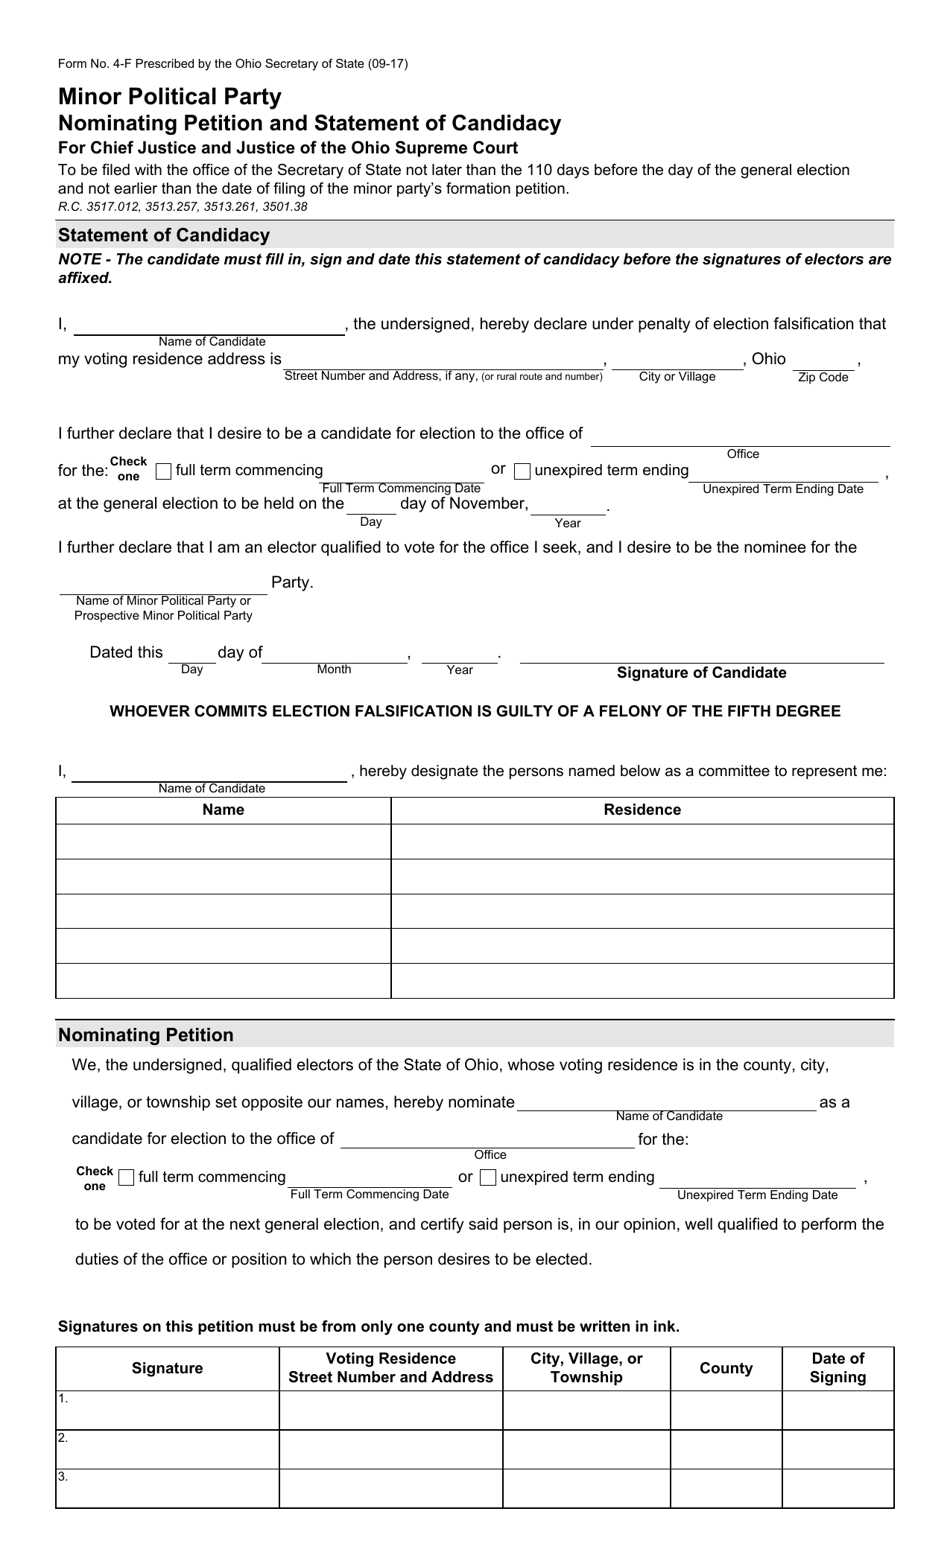 Form 4-F Minor Political Party Nominating Petition and Statement of Candidacy for Chief Justice and Justice of the Ohio Supreme Court - Ohio, Page 1